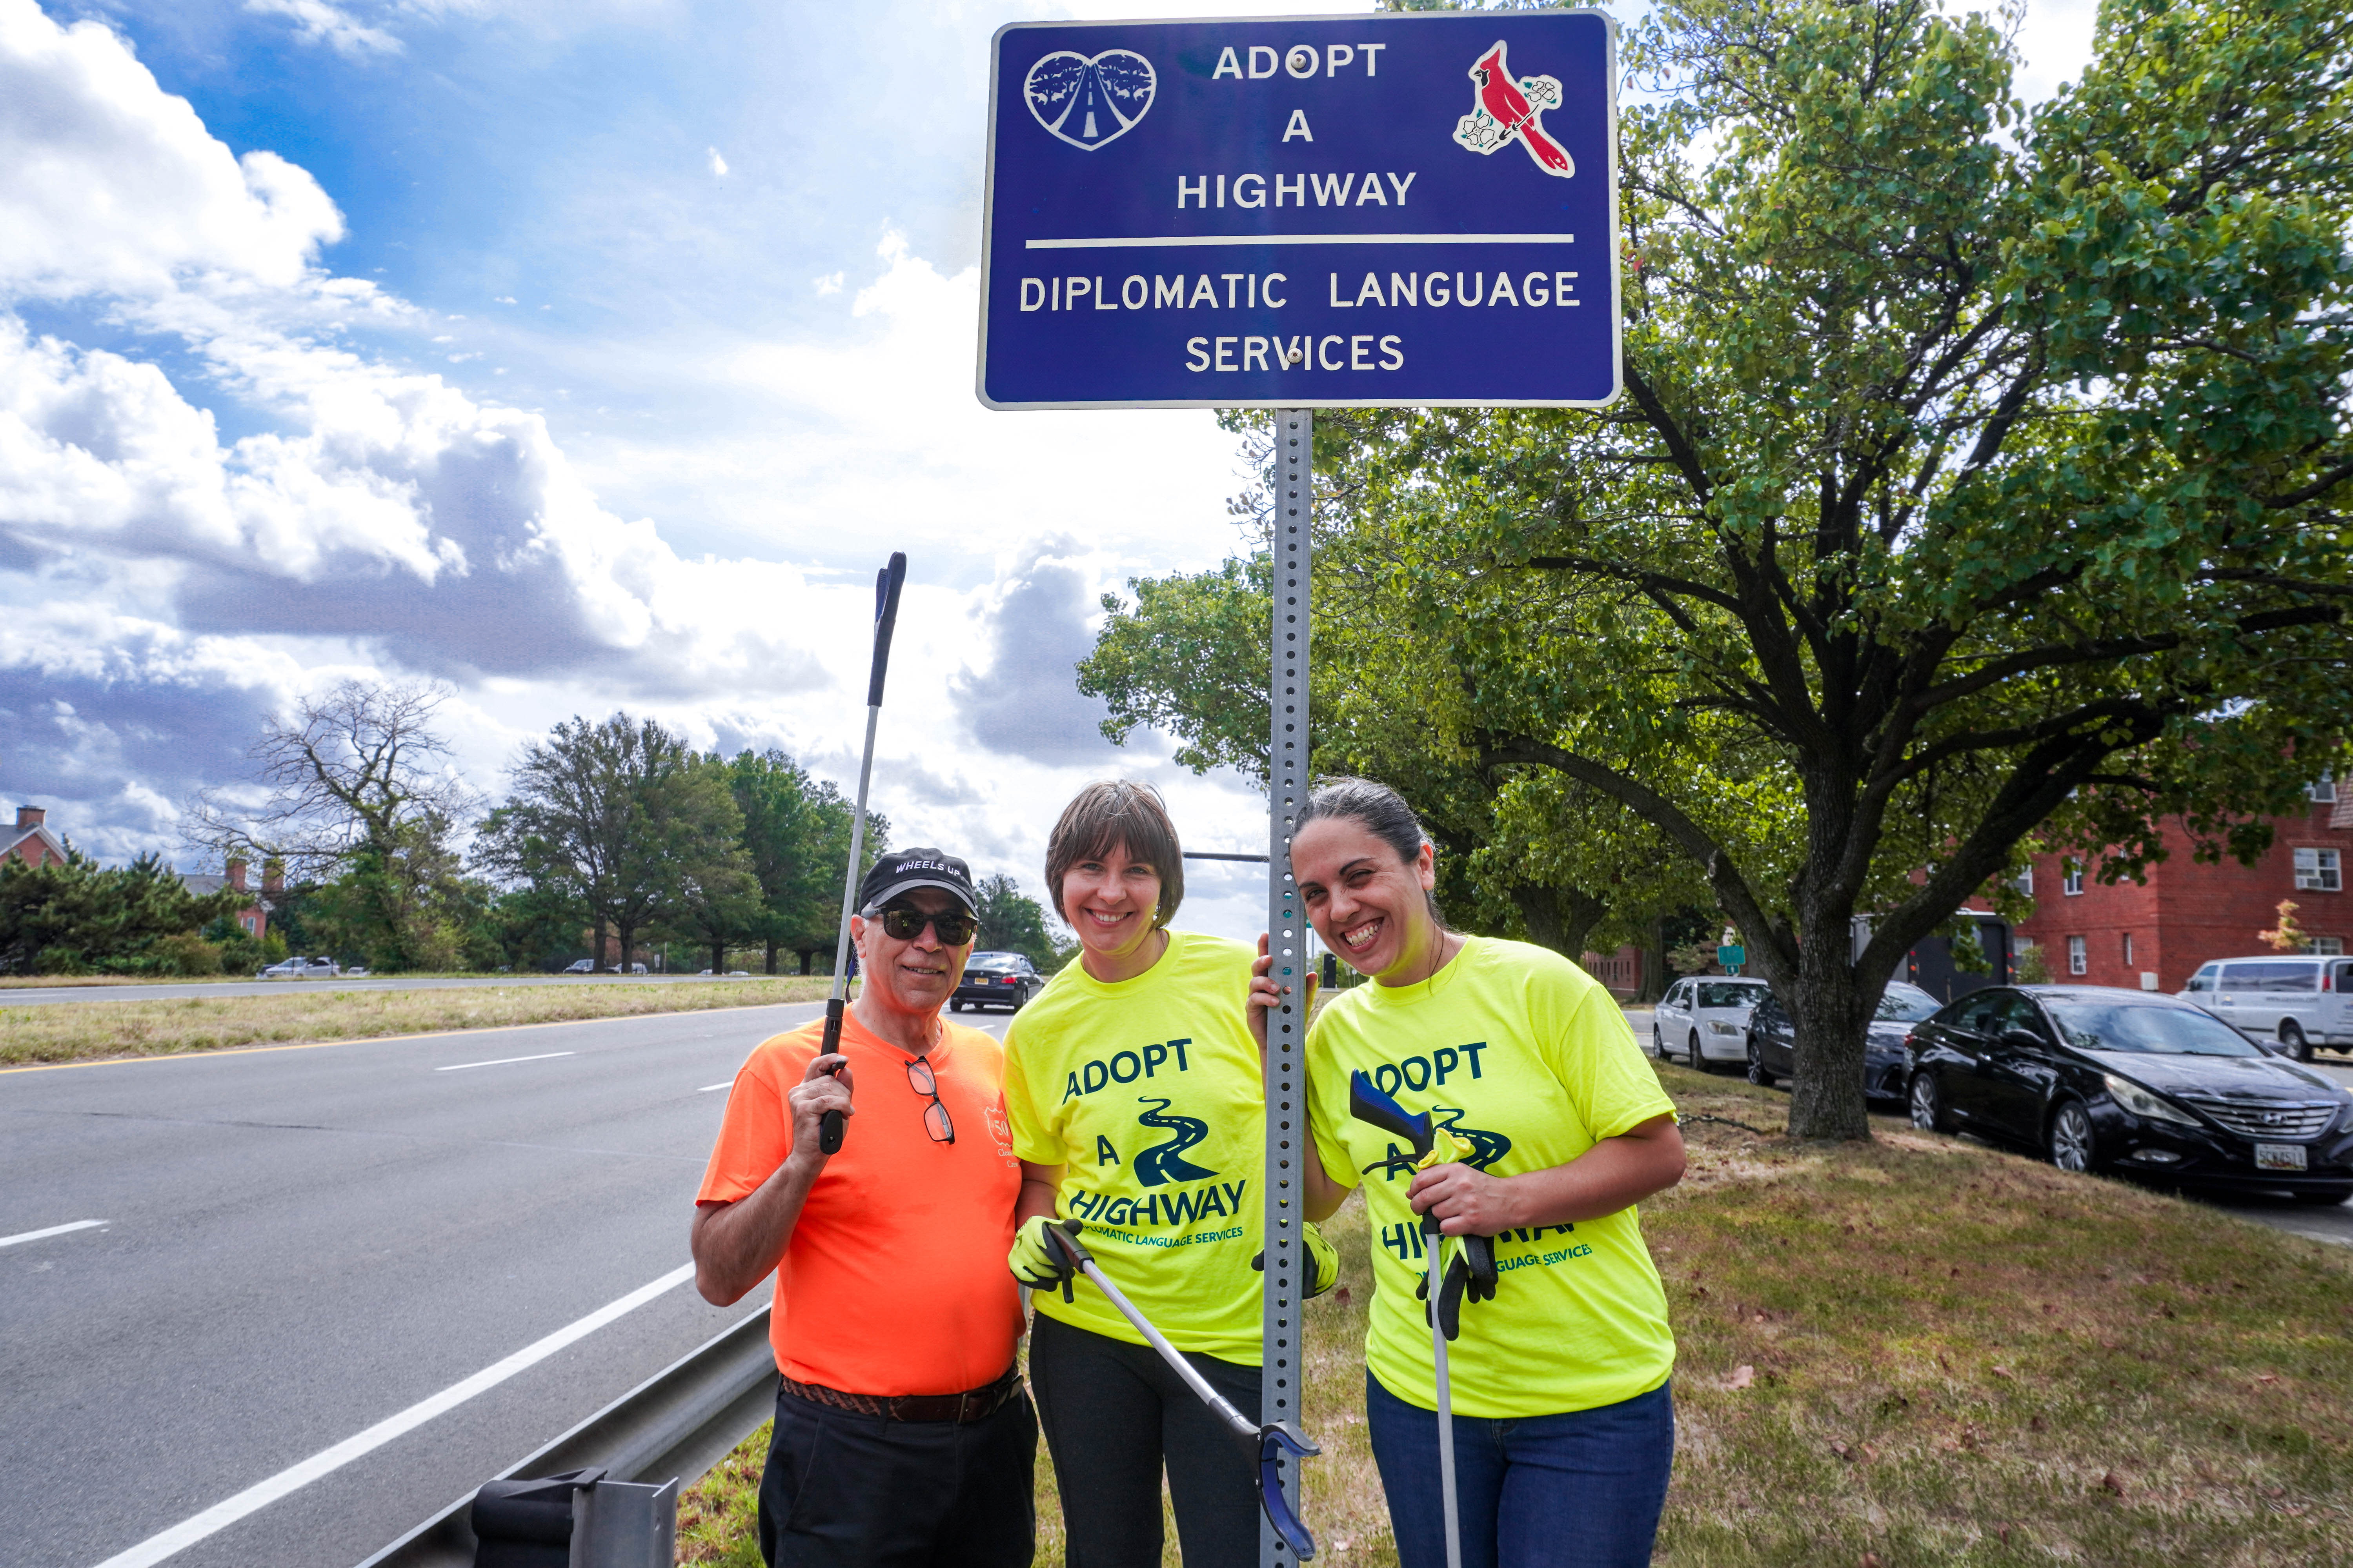 Diplomatic Language Services staff members stand with their adopt-a-highway sign along Route 50 in the Washington DC metro area